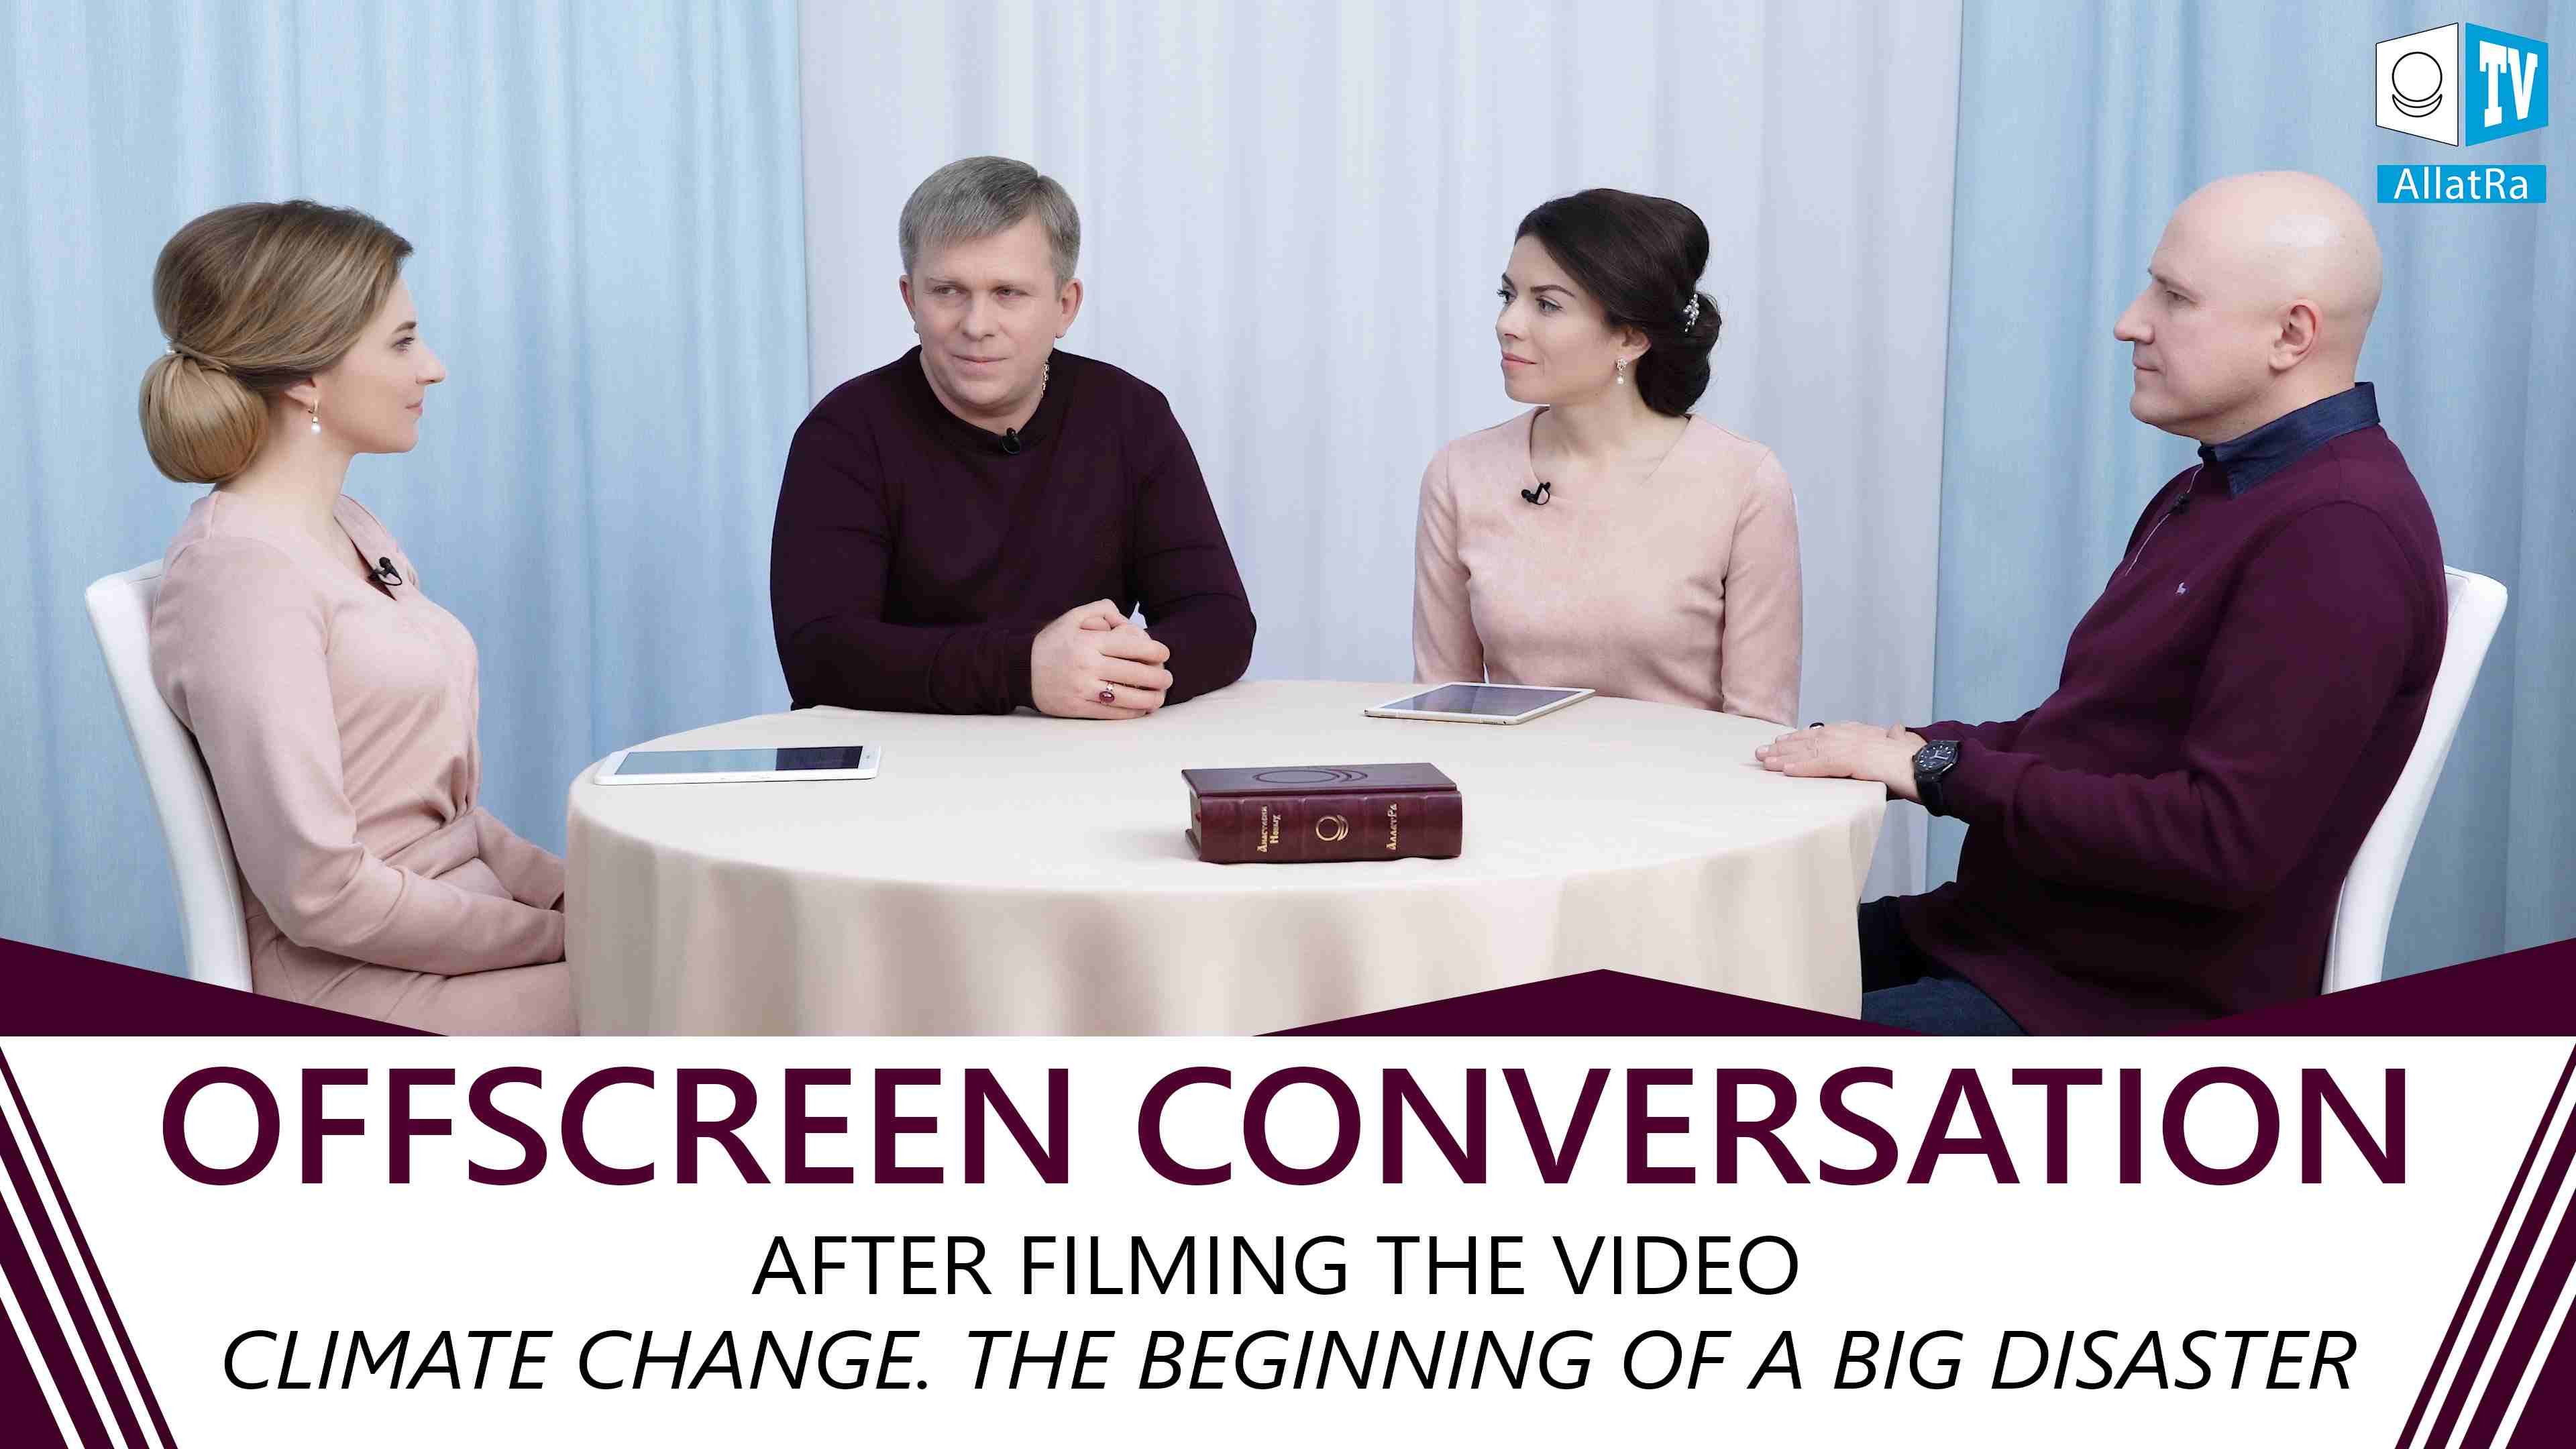 Offscreen conversation after filming the video "Climate Change. The Beginning of a Big Disaster"